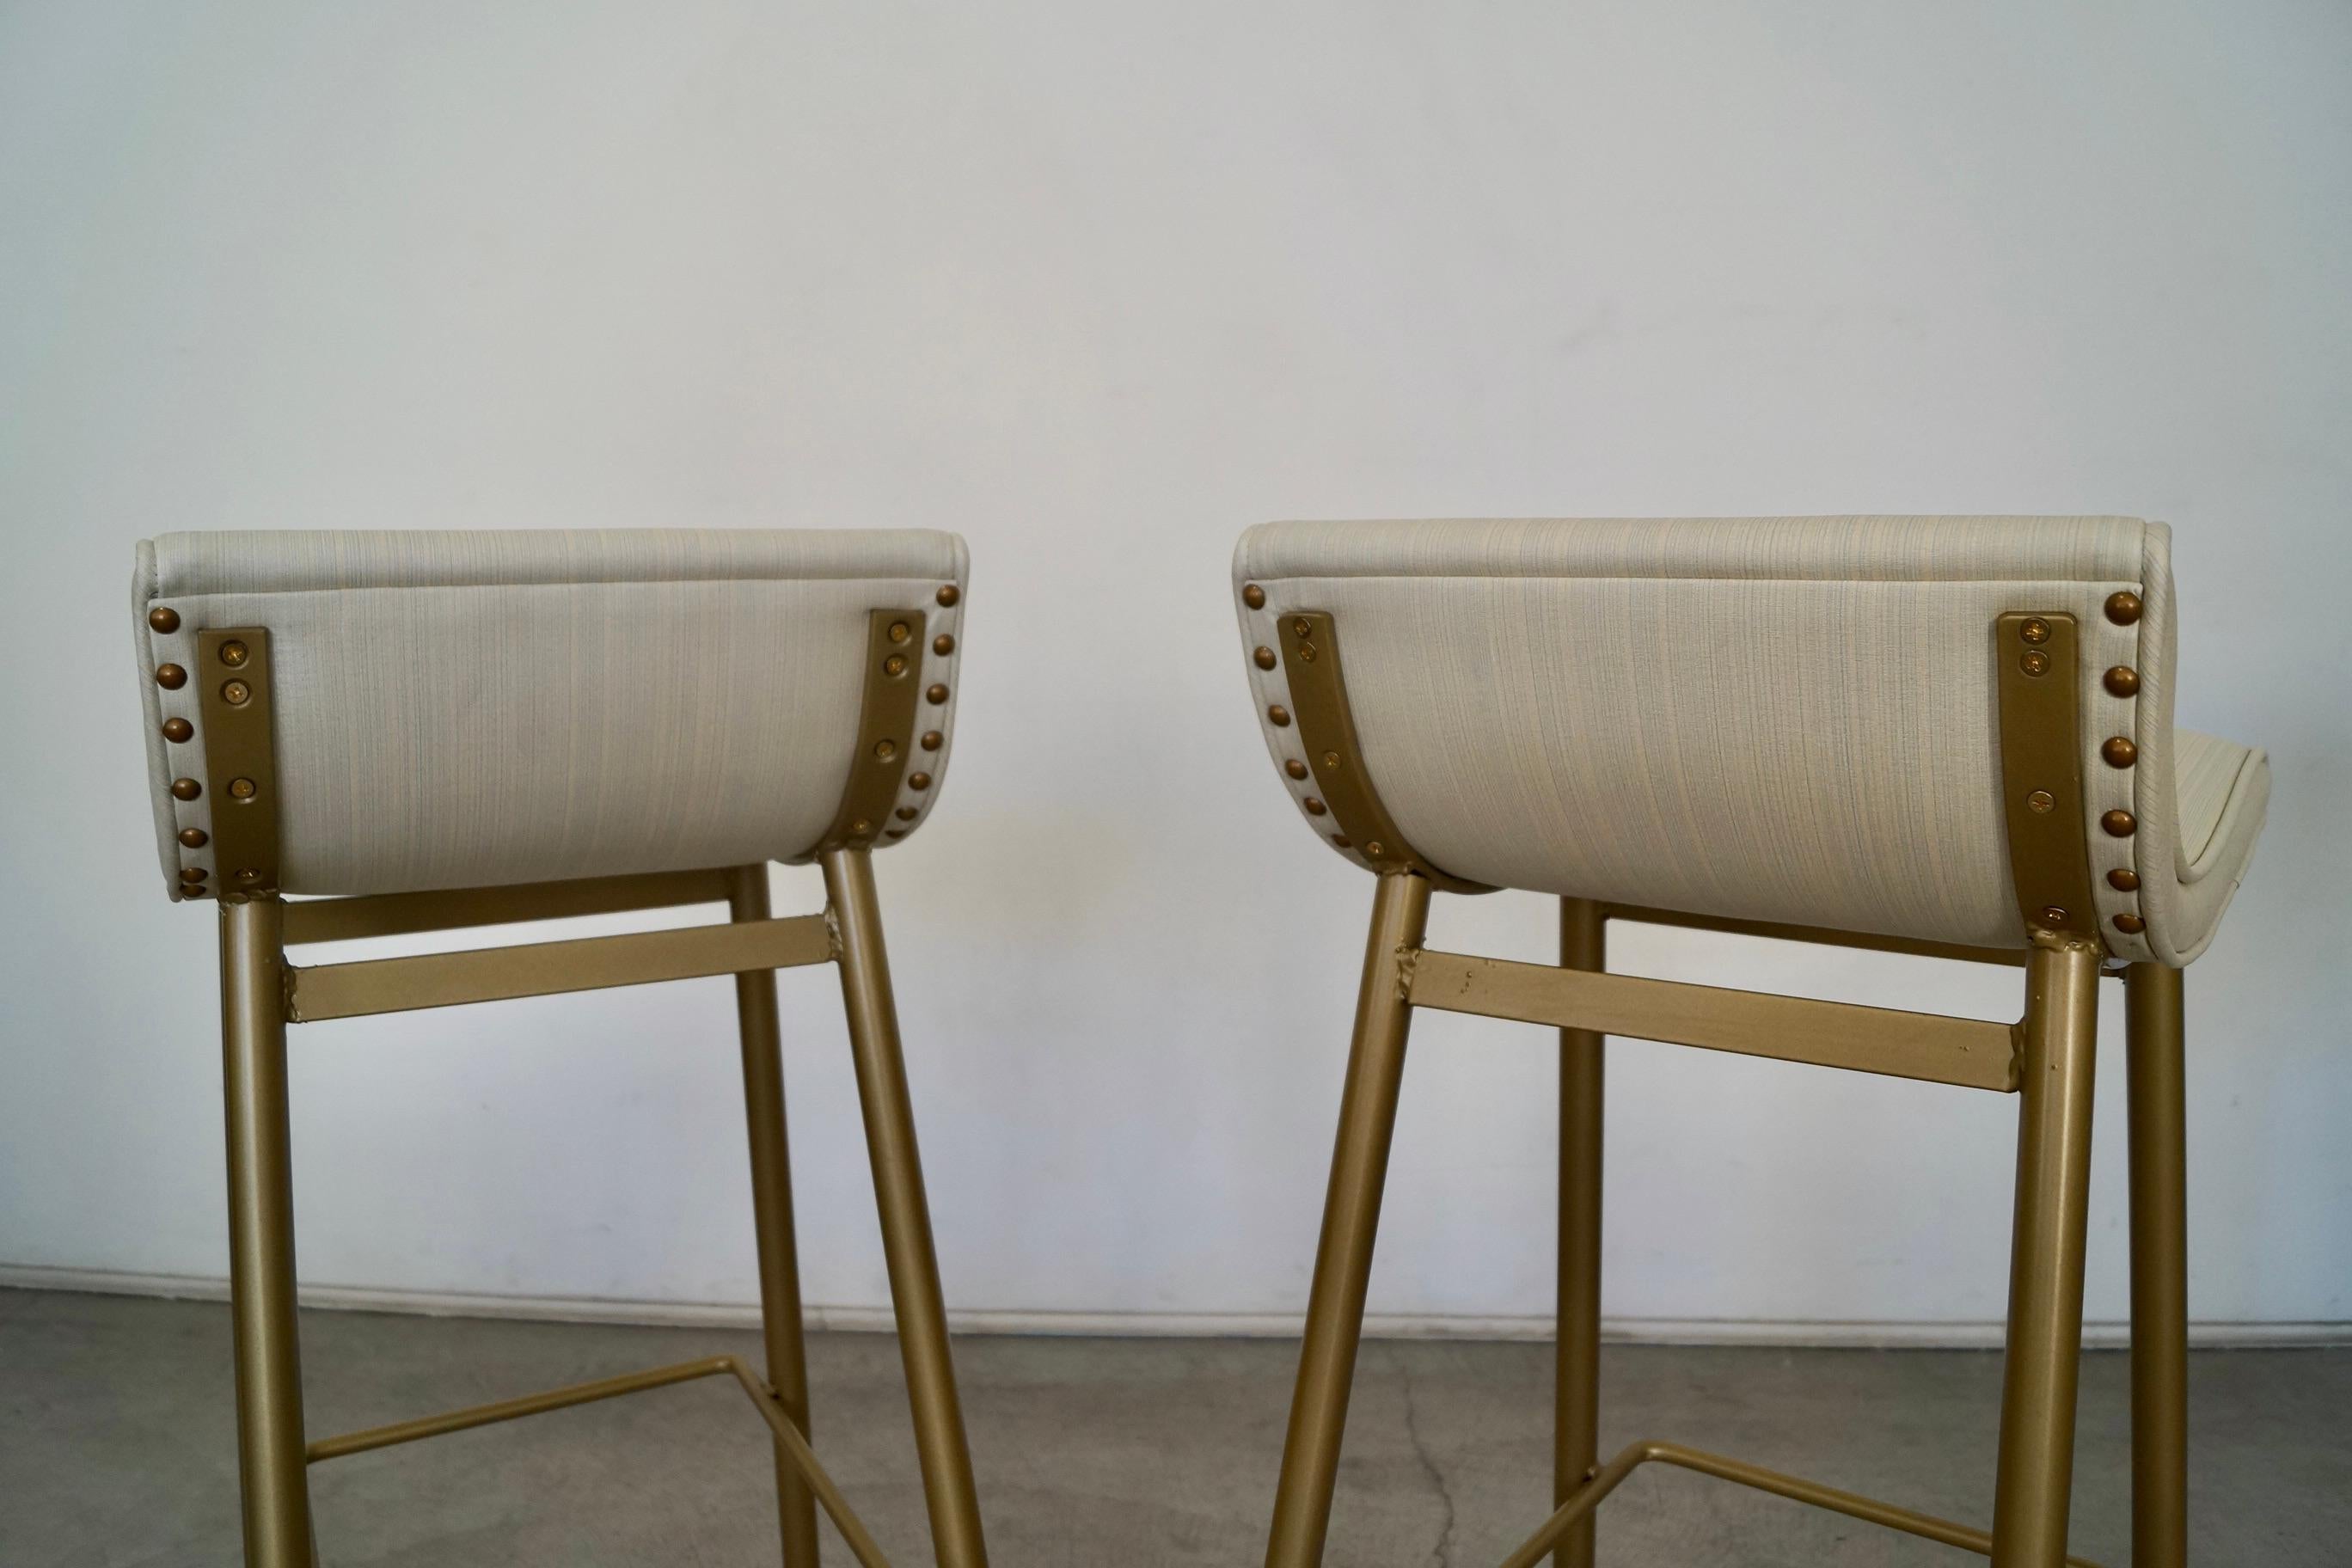 1950's Mid-Century Modern Bar Stools by Vista of California - Set of Three For Sale 9